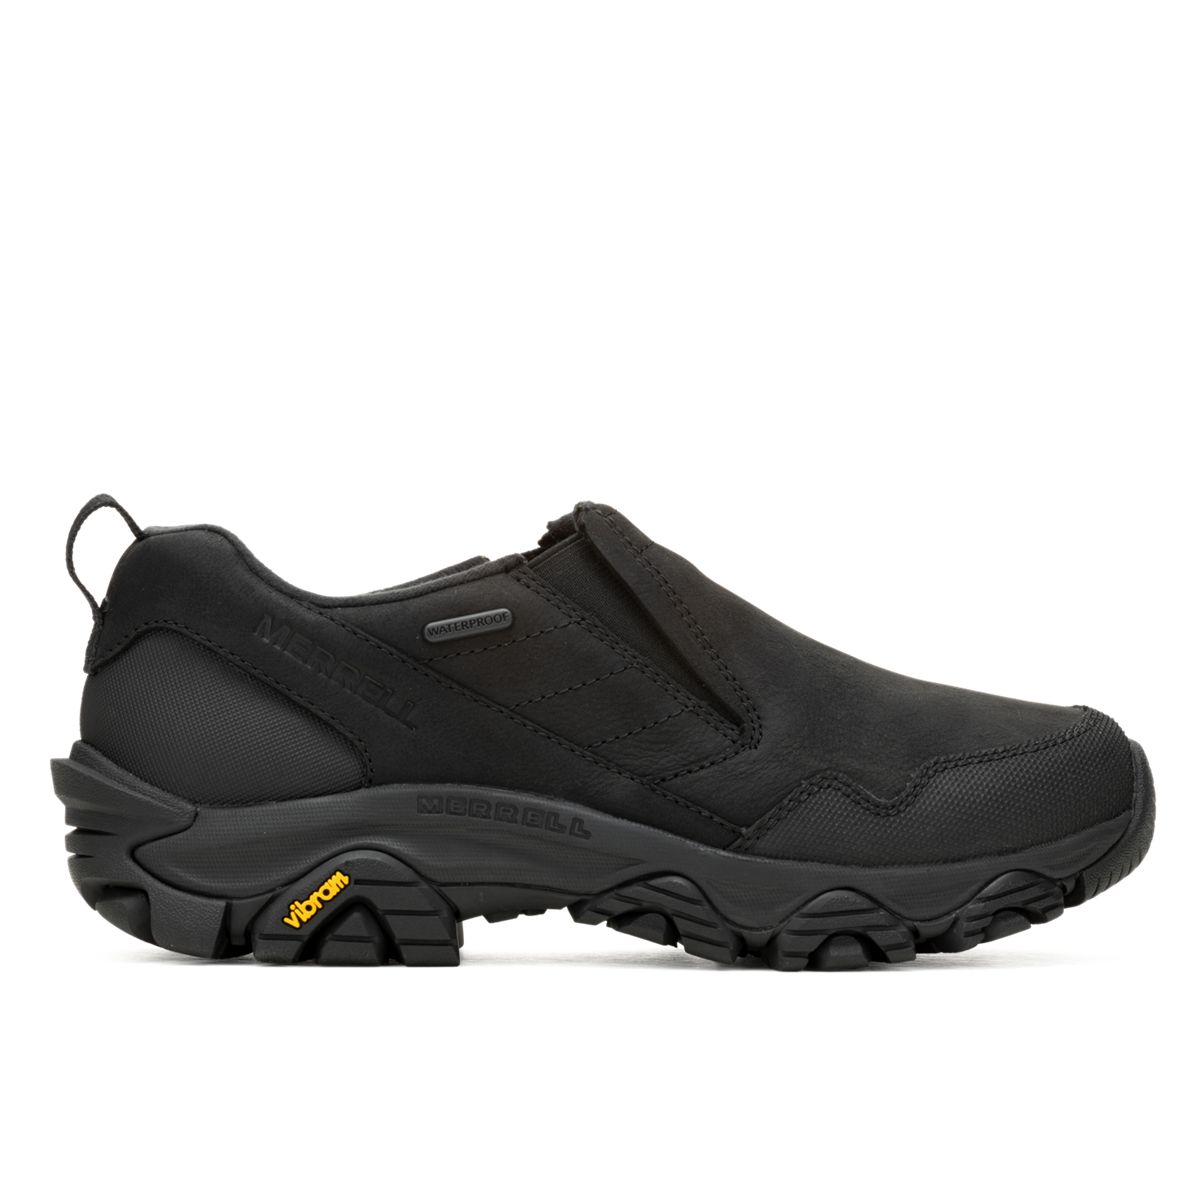 ColdPack 3 Thermo Moc Waterproof - Shoes | Merrell